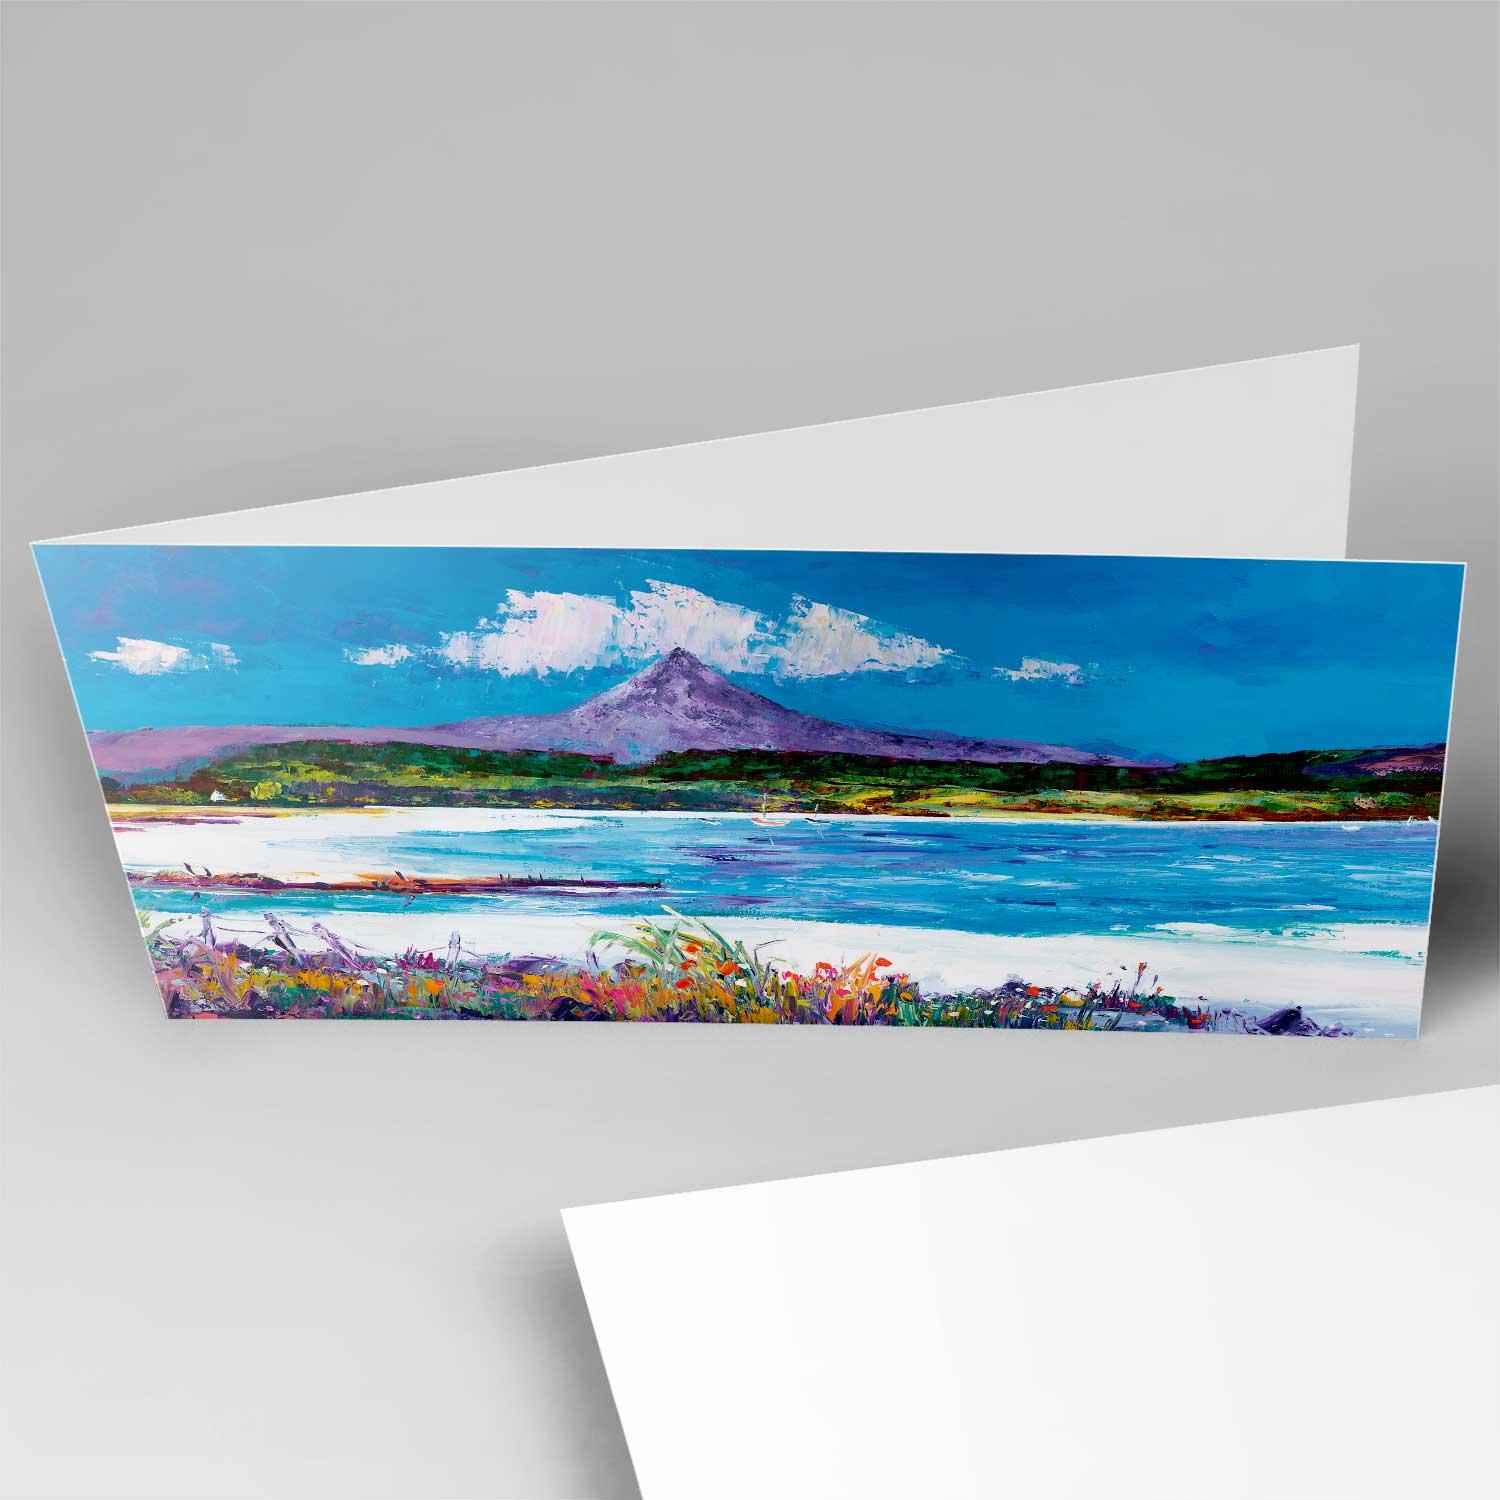 Goatfell from Brodick Bay Greeting Card from an original painting by artist Jean Feeney